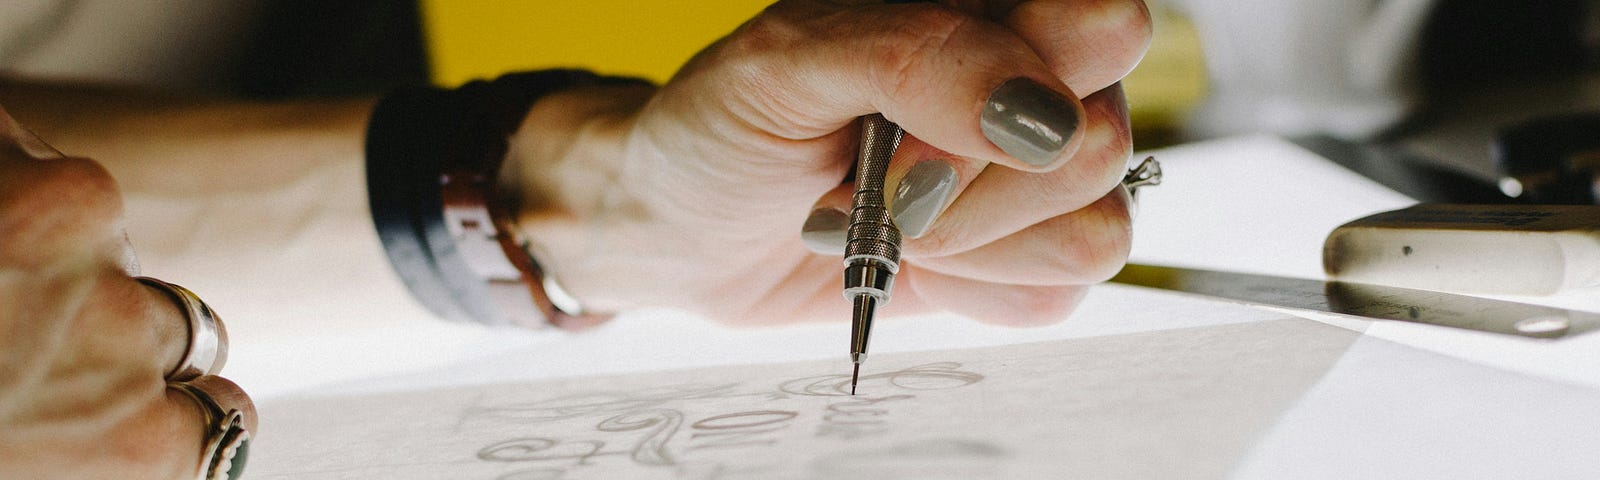 A woman is creating with pen and paper.